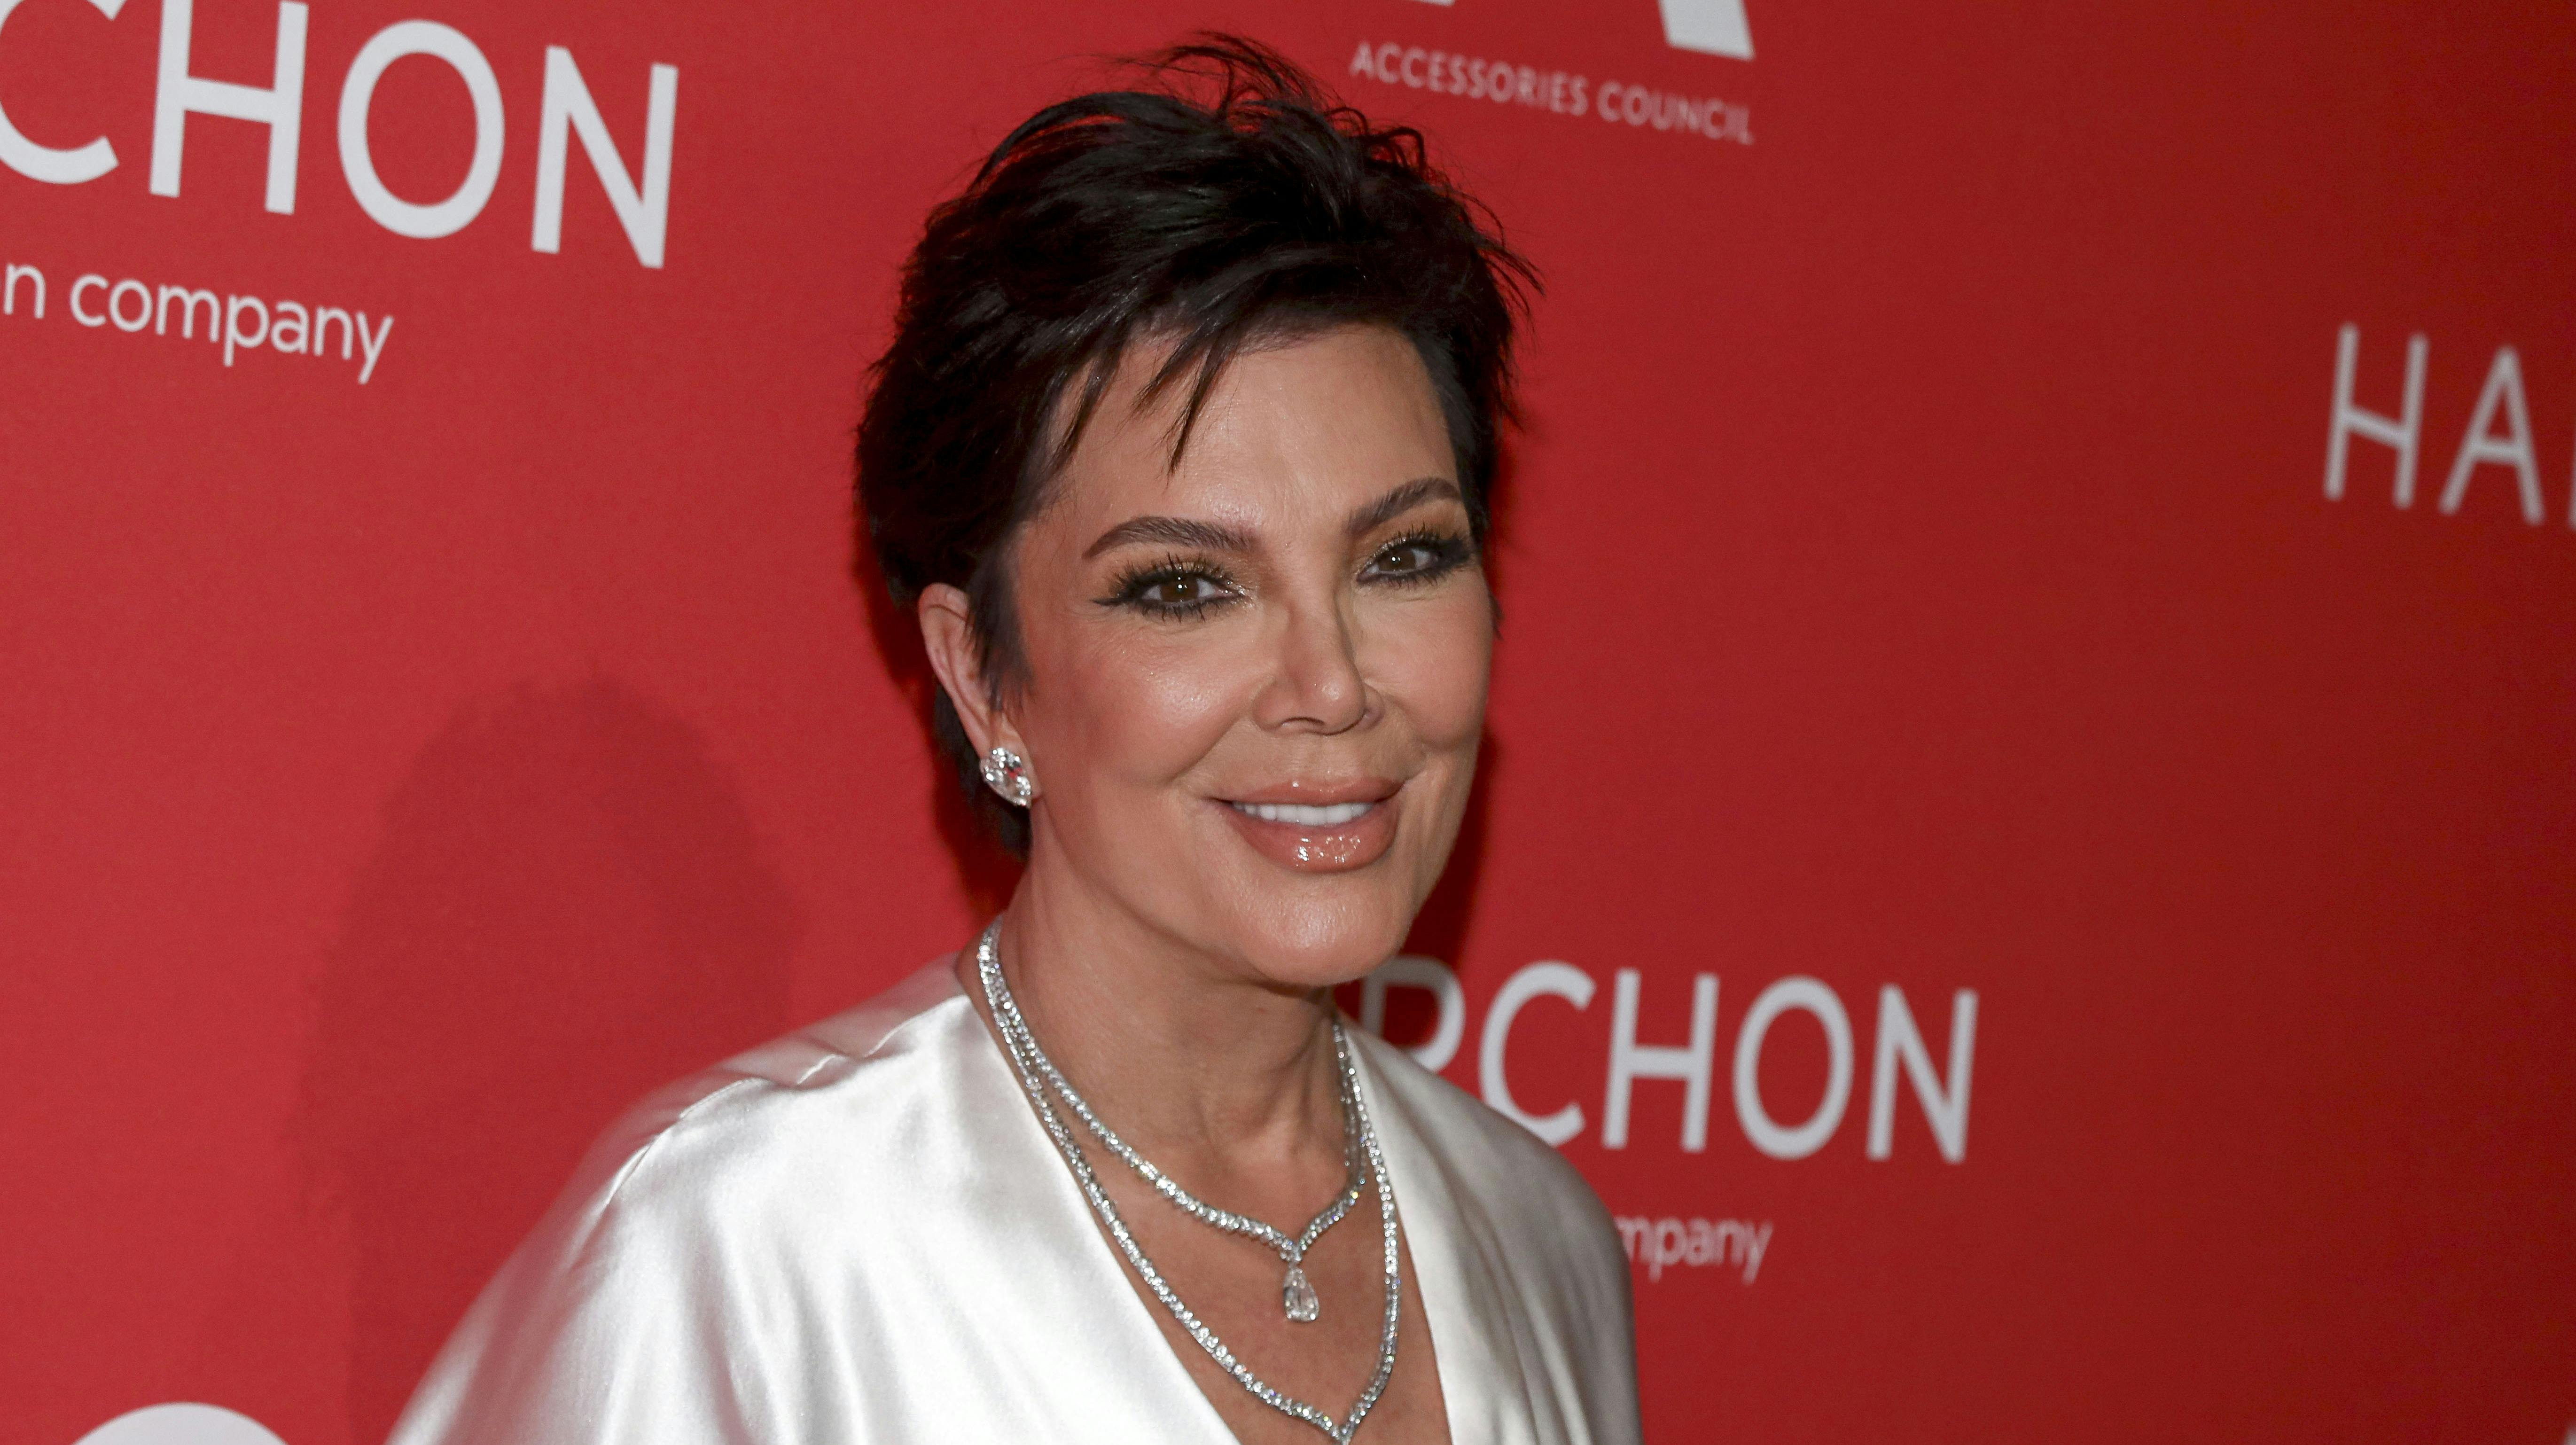 Television personality Kris Jenner attends the Accessories Council 27th annual ACE Awards at Cipriani 42nd Street on Wednesday, May 3, 2023, in New York. (Photo by Andy Kropa/Invision/AP)